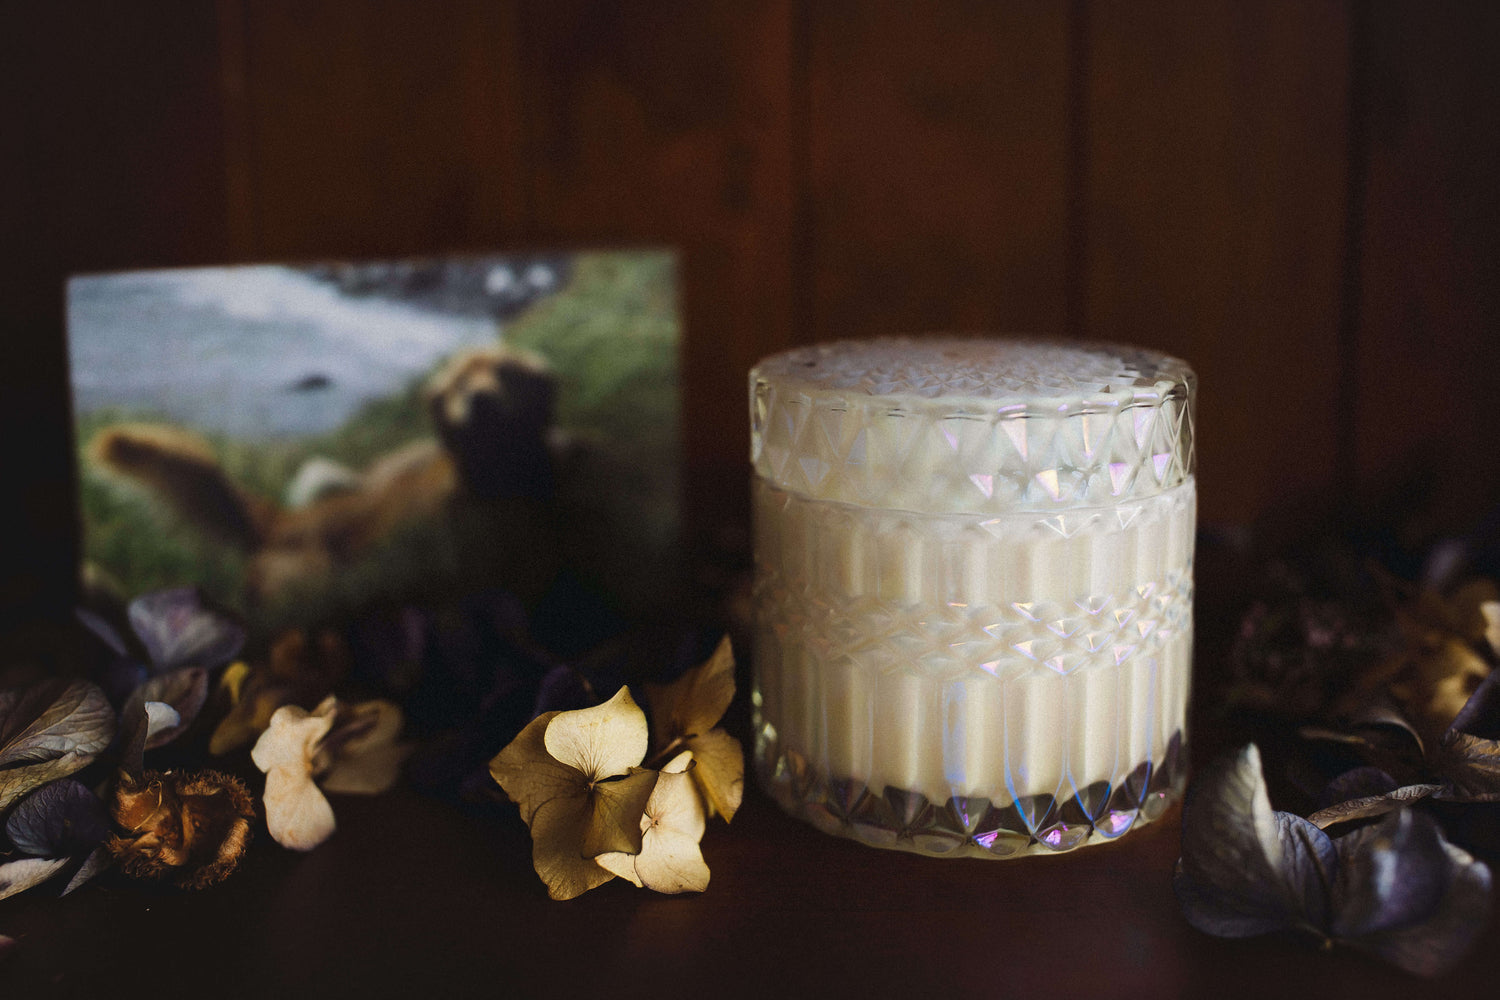 A gorgeous candle set in a Darcy style opal tinted cut glass vessel with lid that can be used as a jewellery box after the candle has completed its journey. This candle is designed to bring comfort to those who are grieving the loss of a loved and cherished pet.